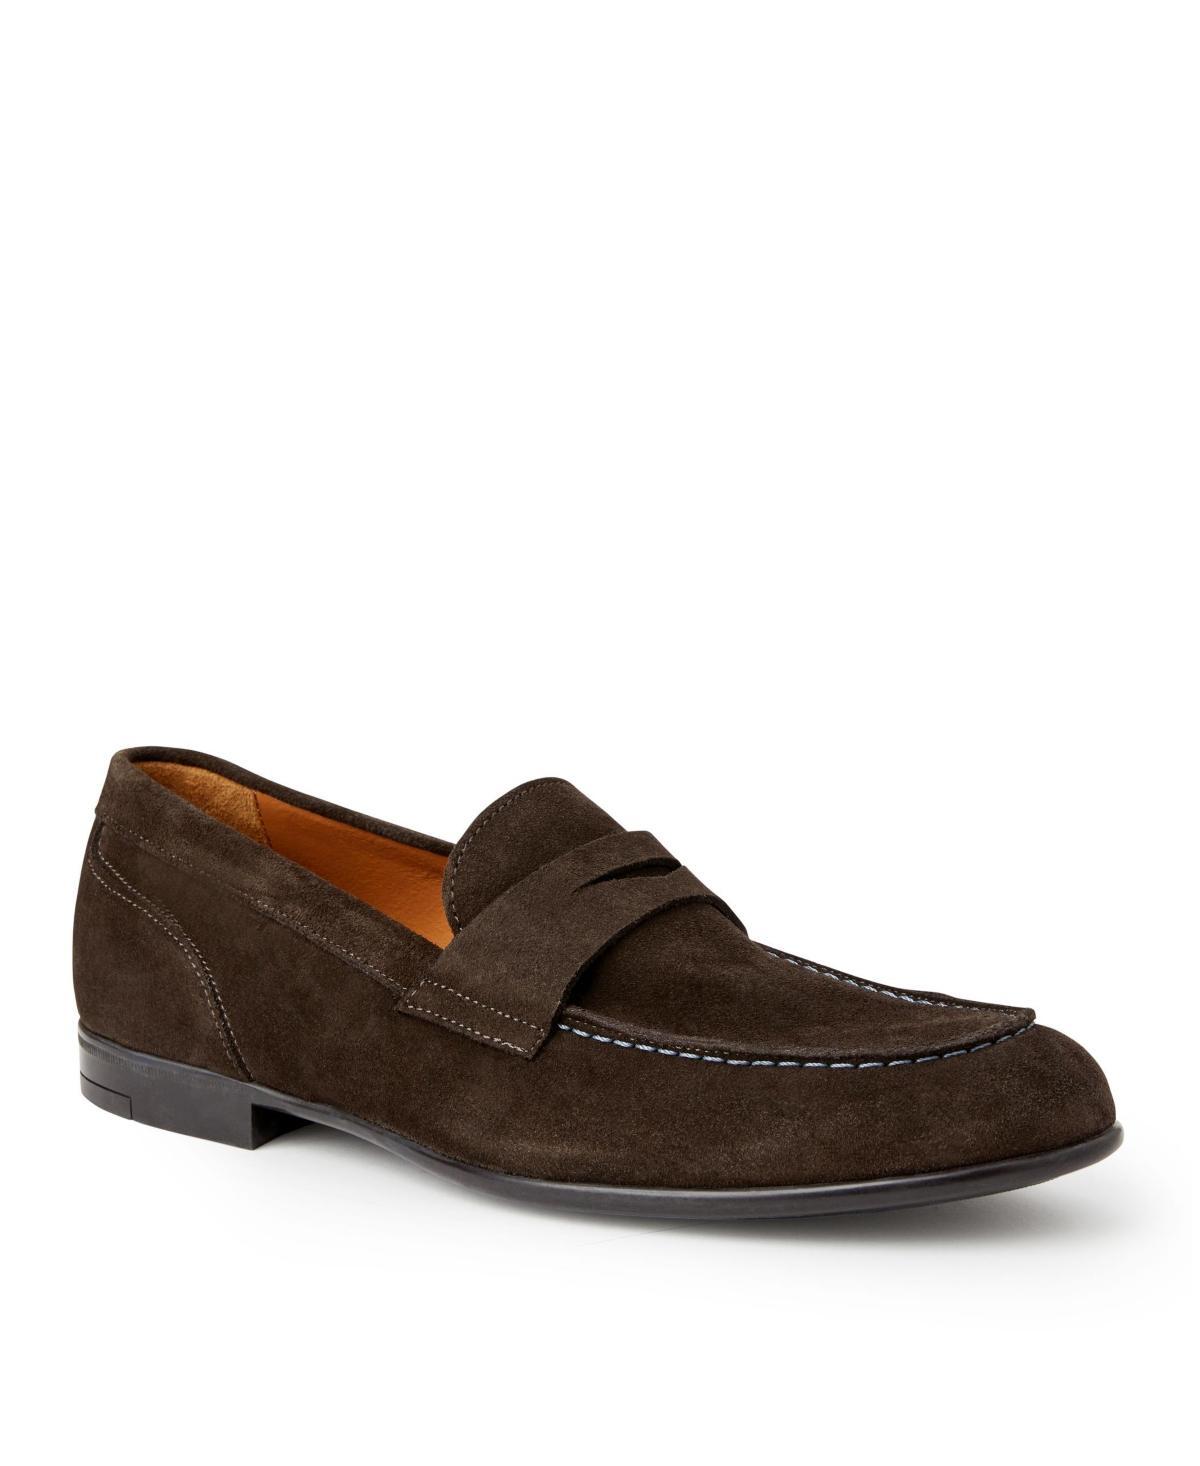 Bruno Magli Mens Silas Slip-On Shoes Mens Shoes Product Image